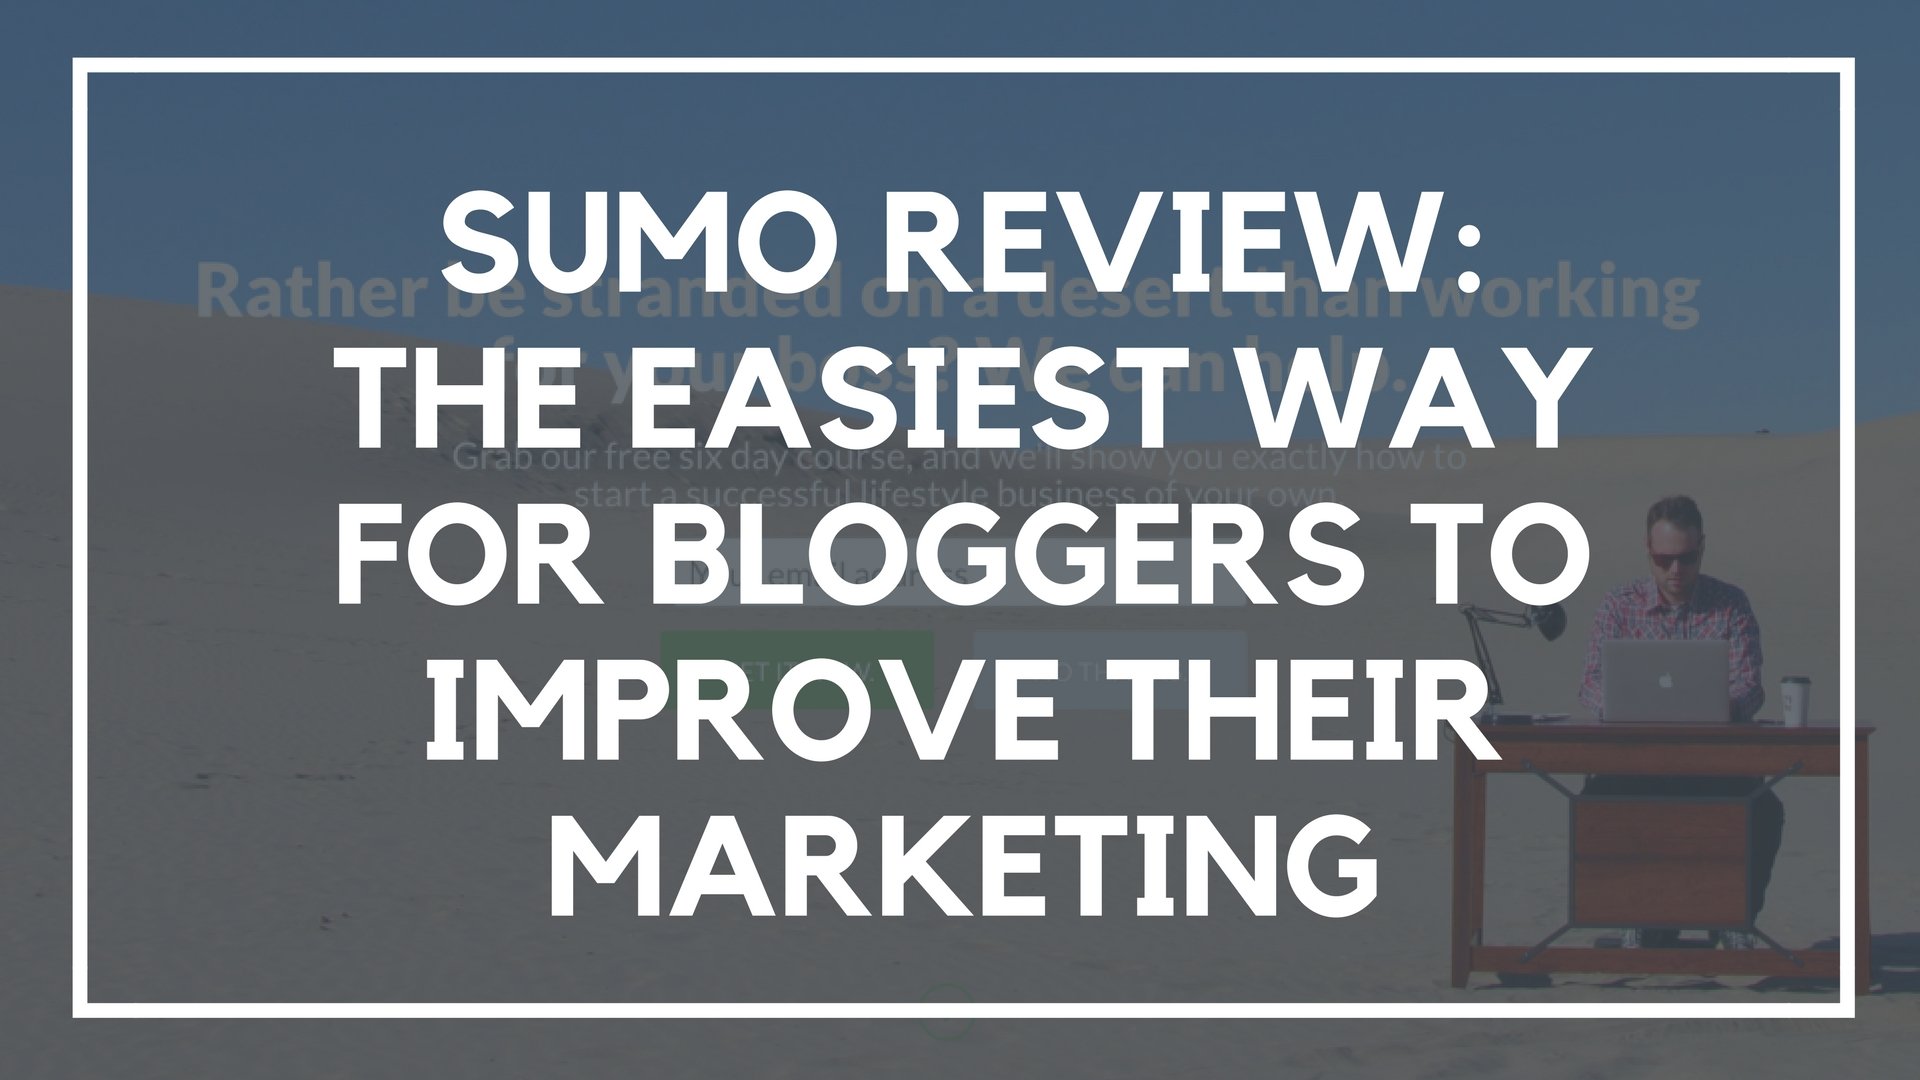 Sumo Review: The Easiest Way for Bloggers to Improve Their Marketing